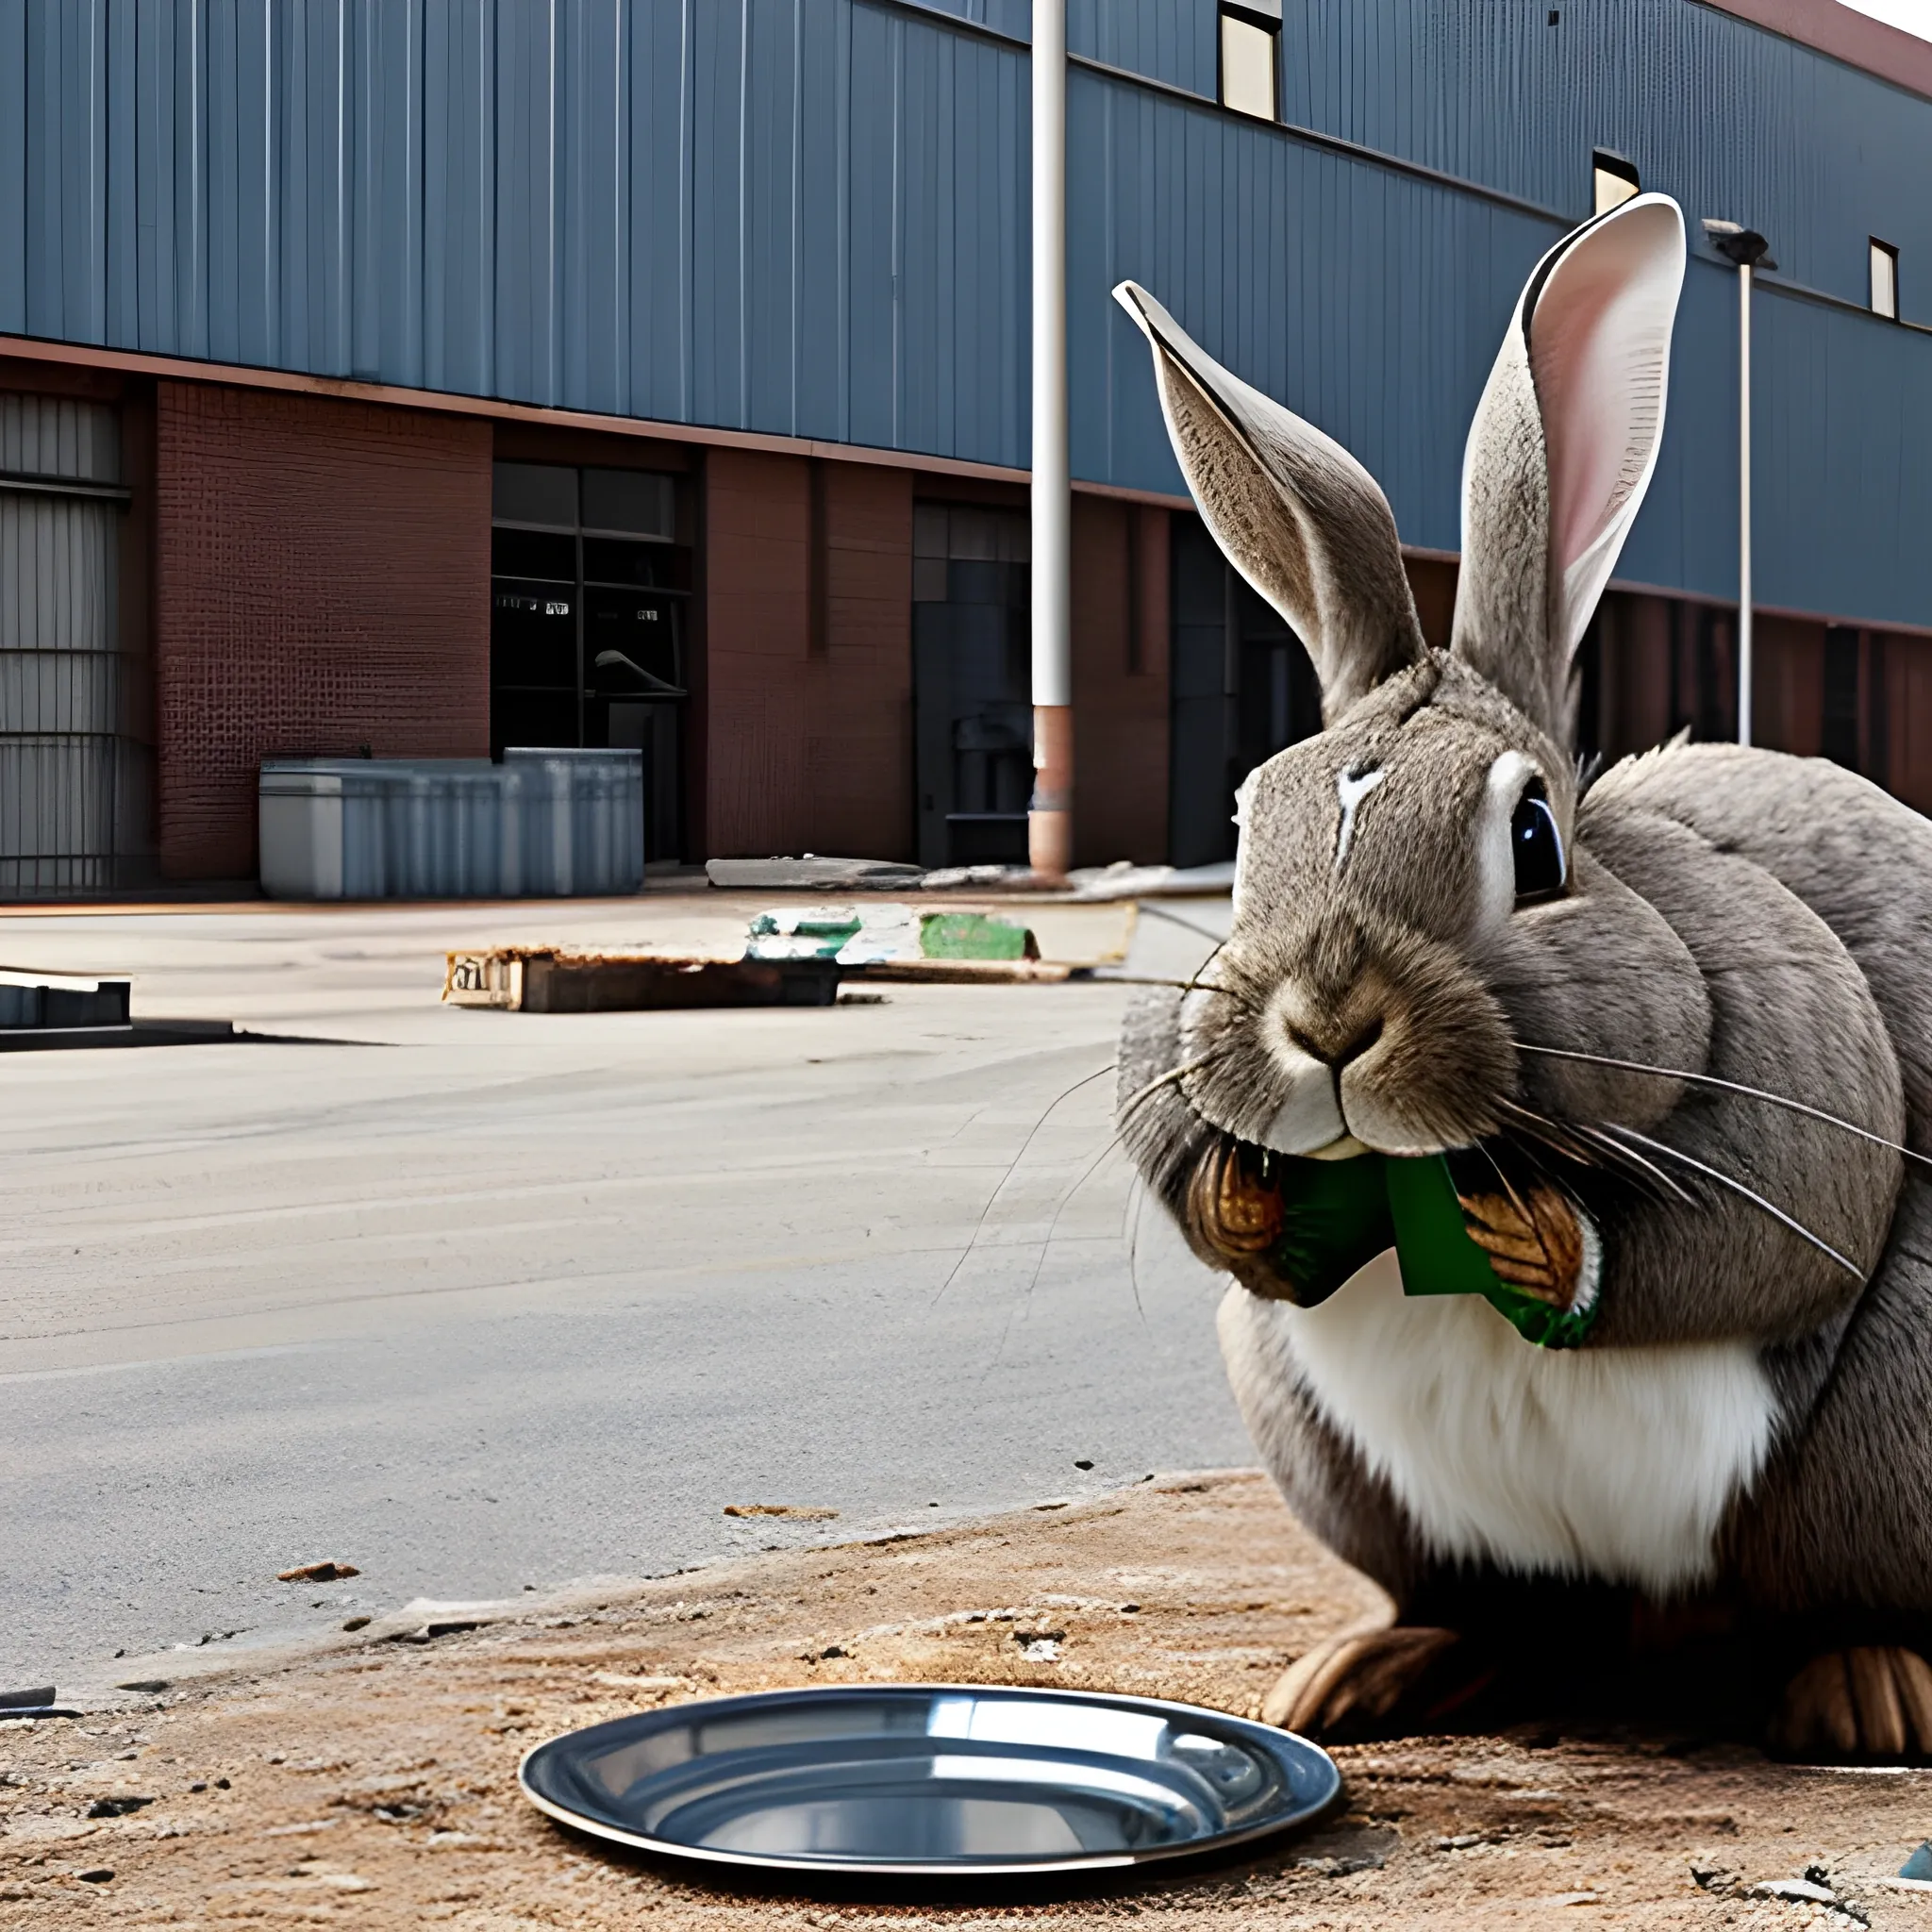 a large rabbit eats metal plates in front of a factory, photograph